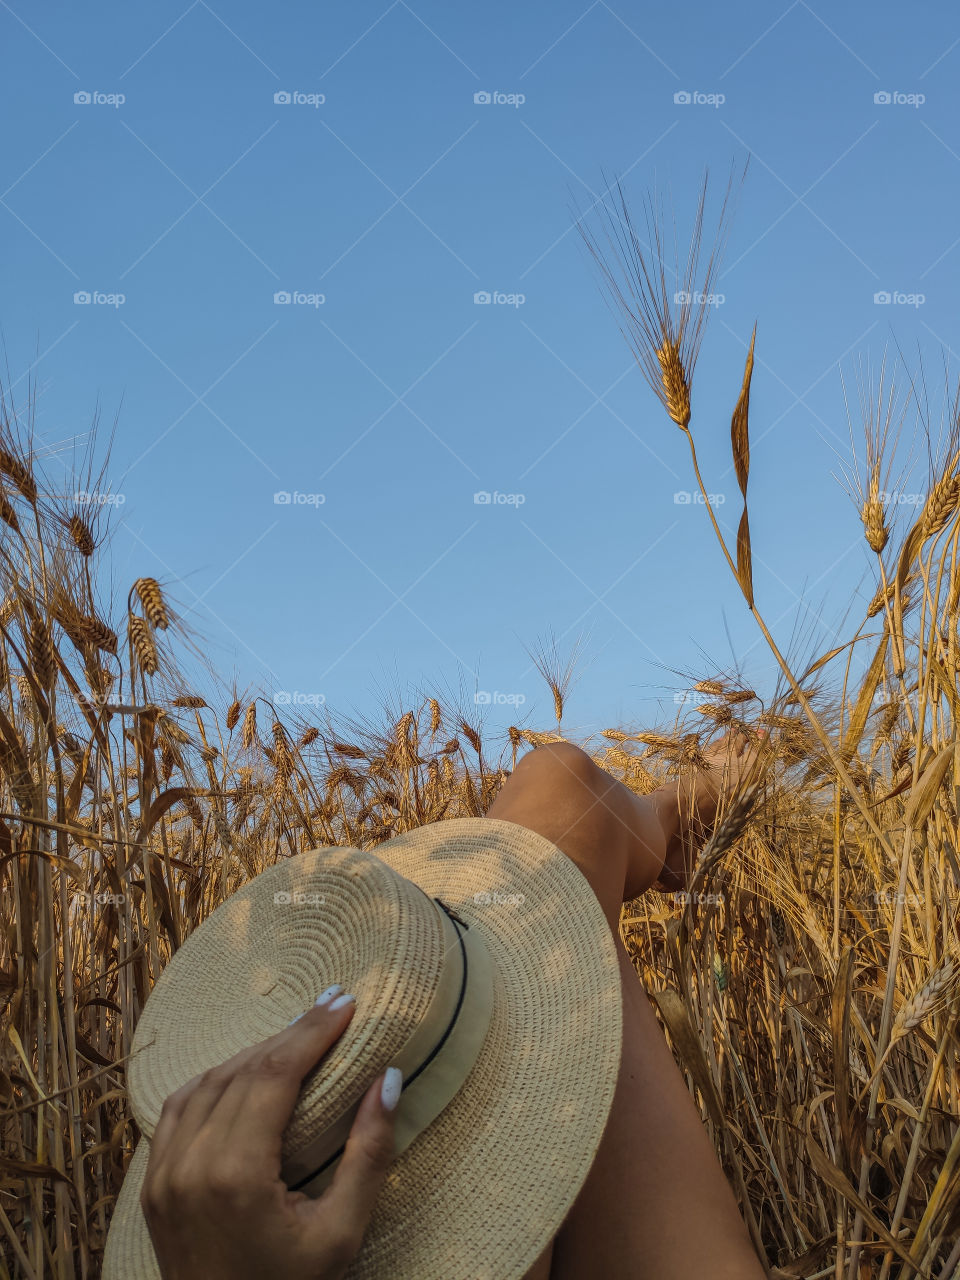 female feet and hat in a wheat field